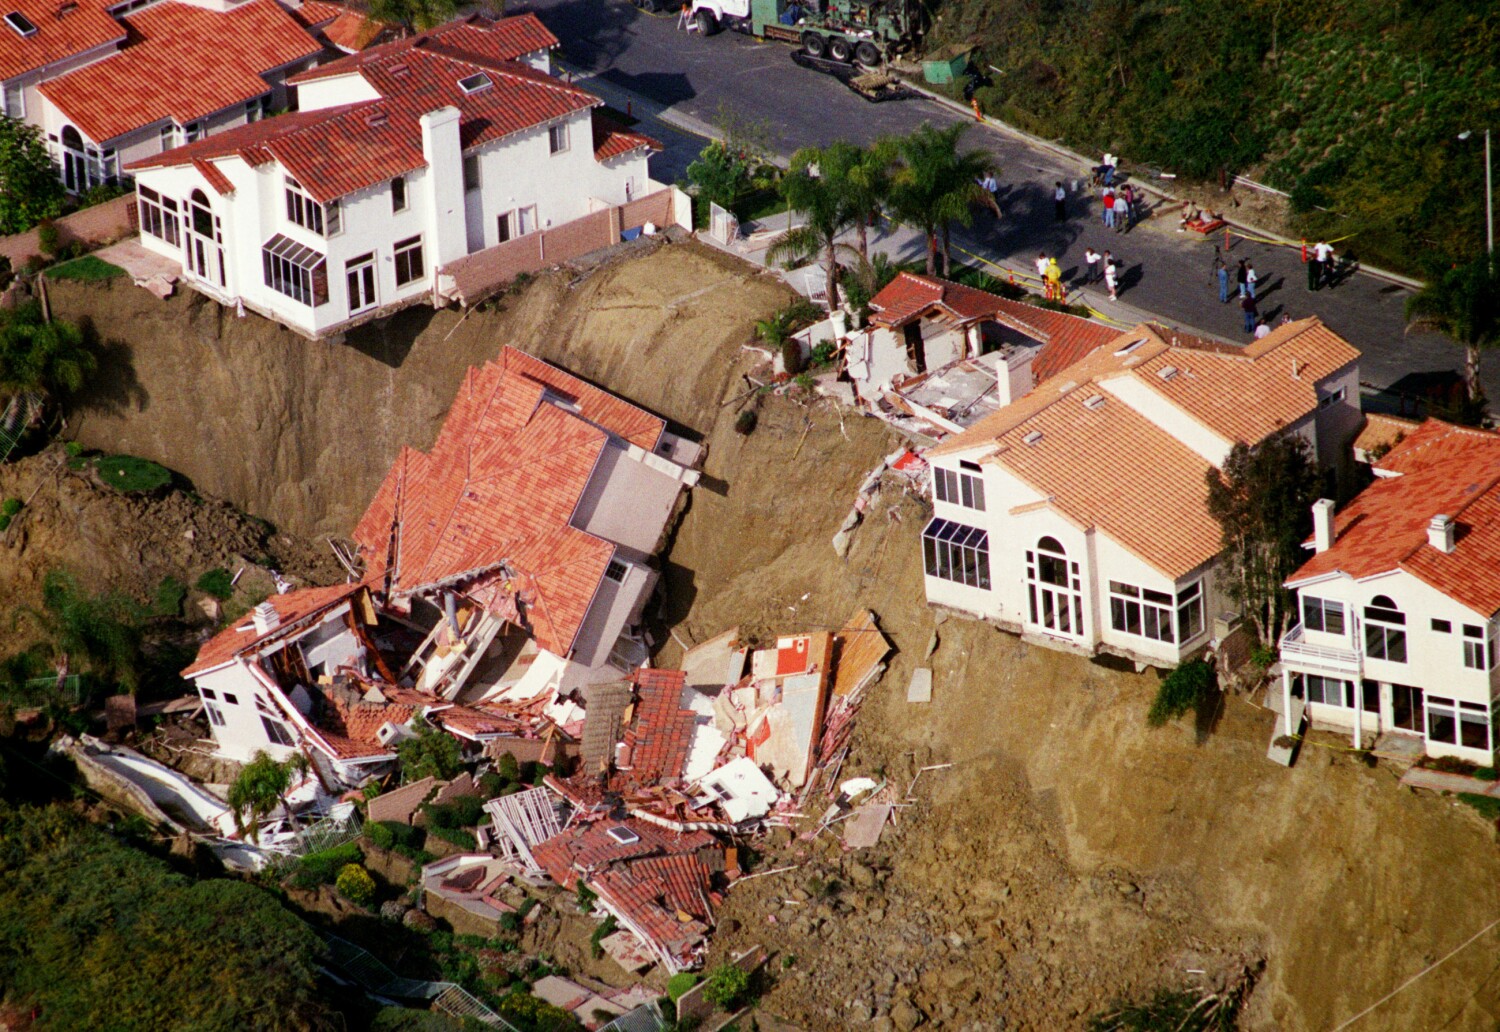 A landslide destroyed O.C. homes 24 years ago. A developer wants to build there again